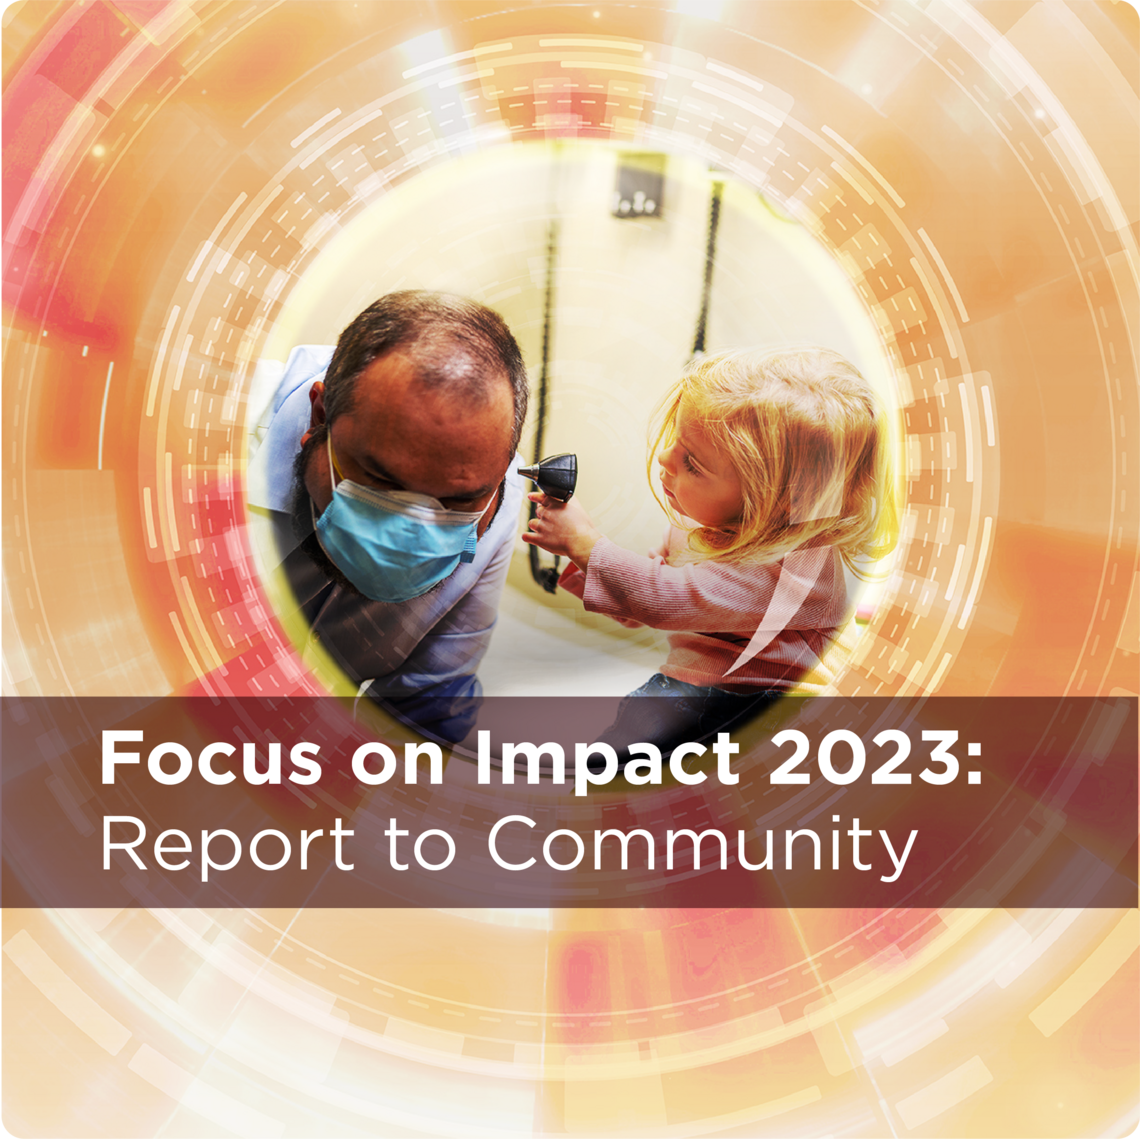 Images showing little girl holding an otoscope to check the doctor's ear. Text reads: Focus on Impact 2023: Report to Community. 